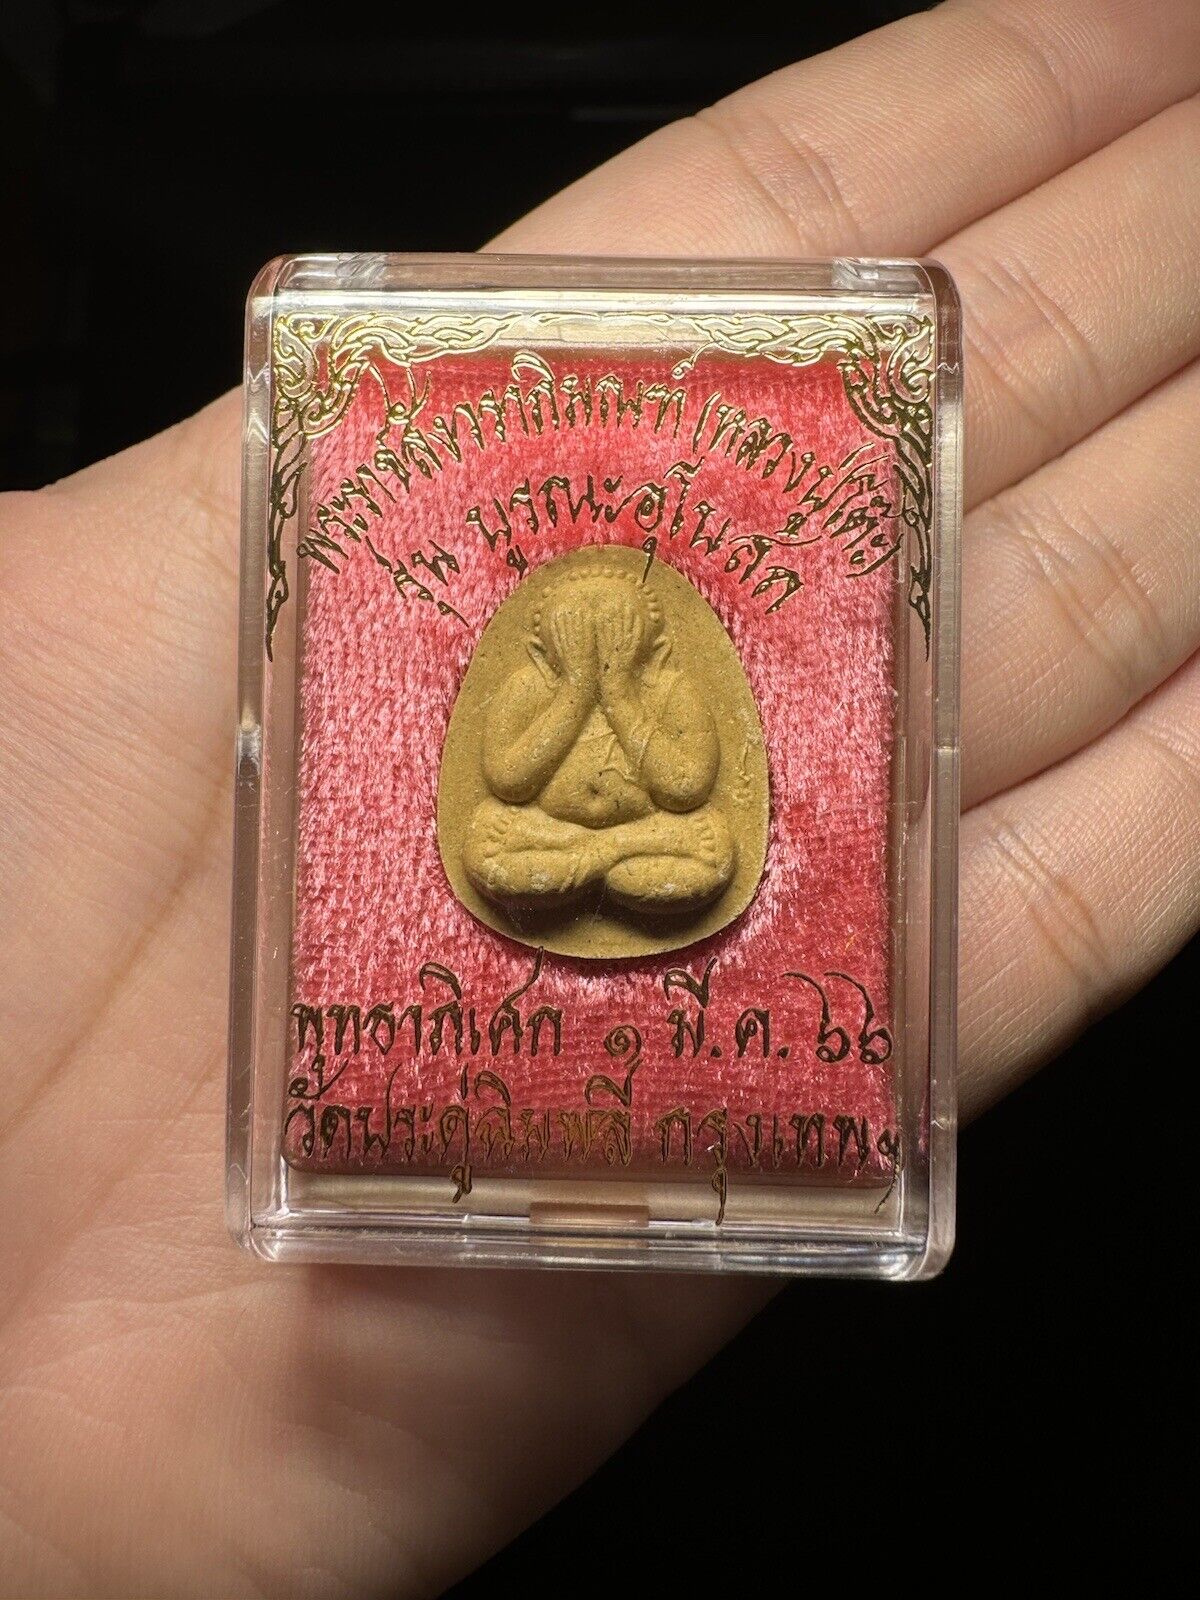 Phra Pidta Lp Toh Thai Amulet Buddha Authentic Original Lucky Charm Be 2566 New